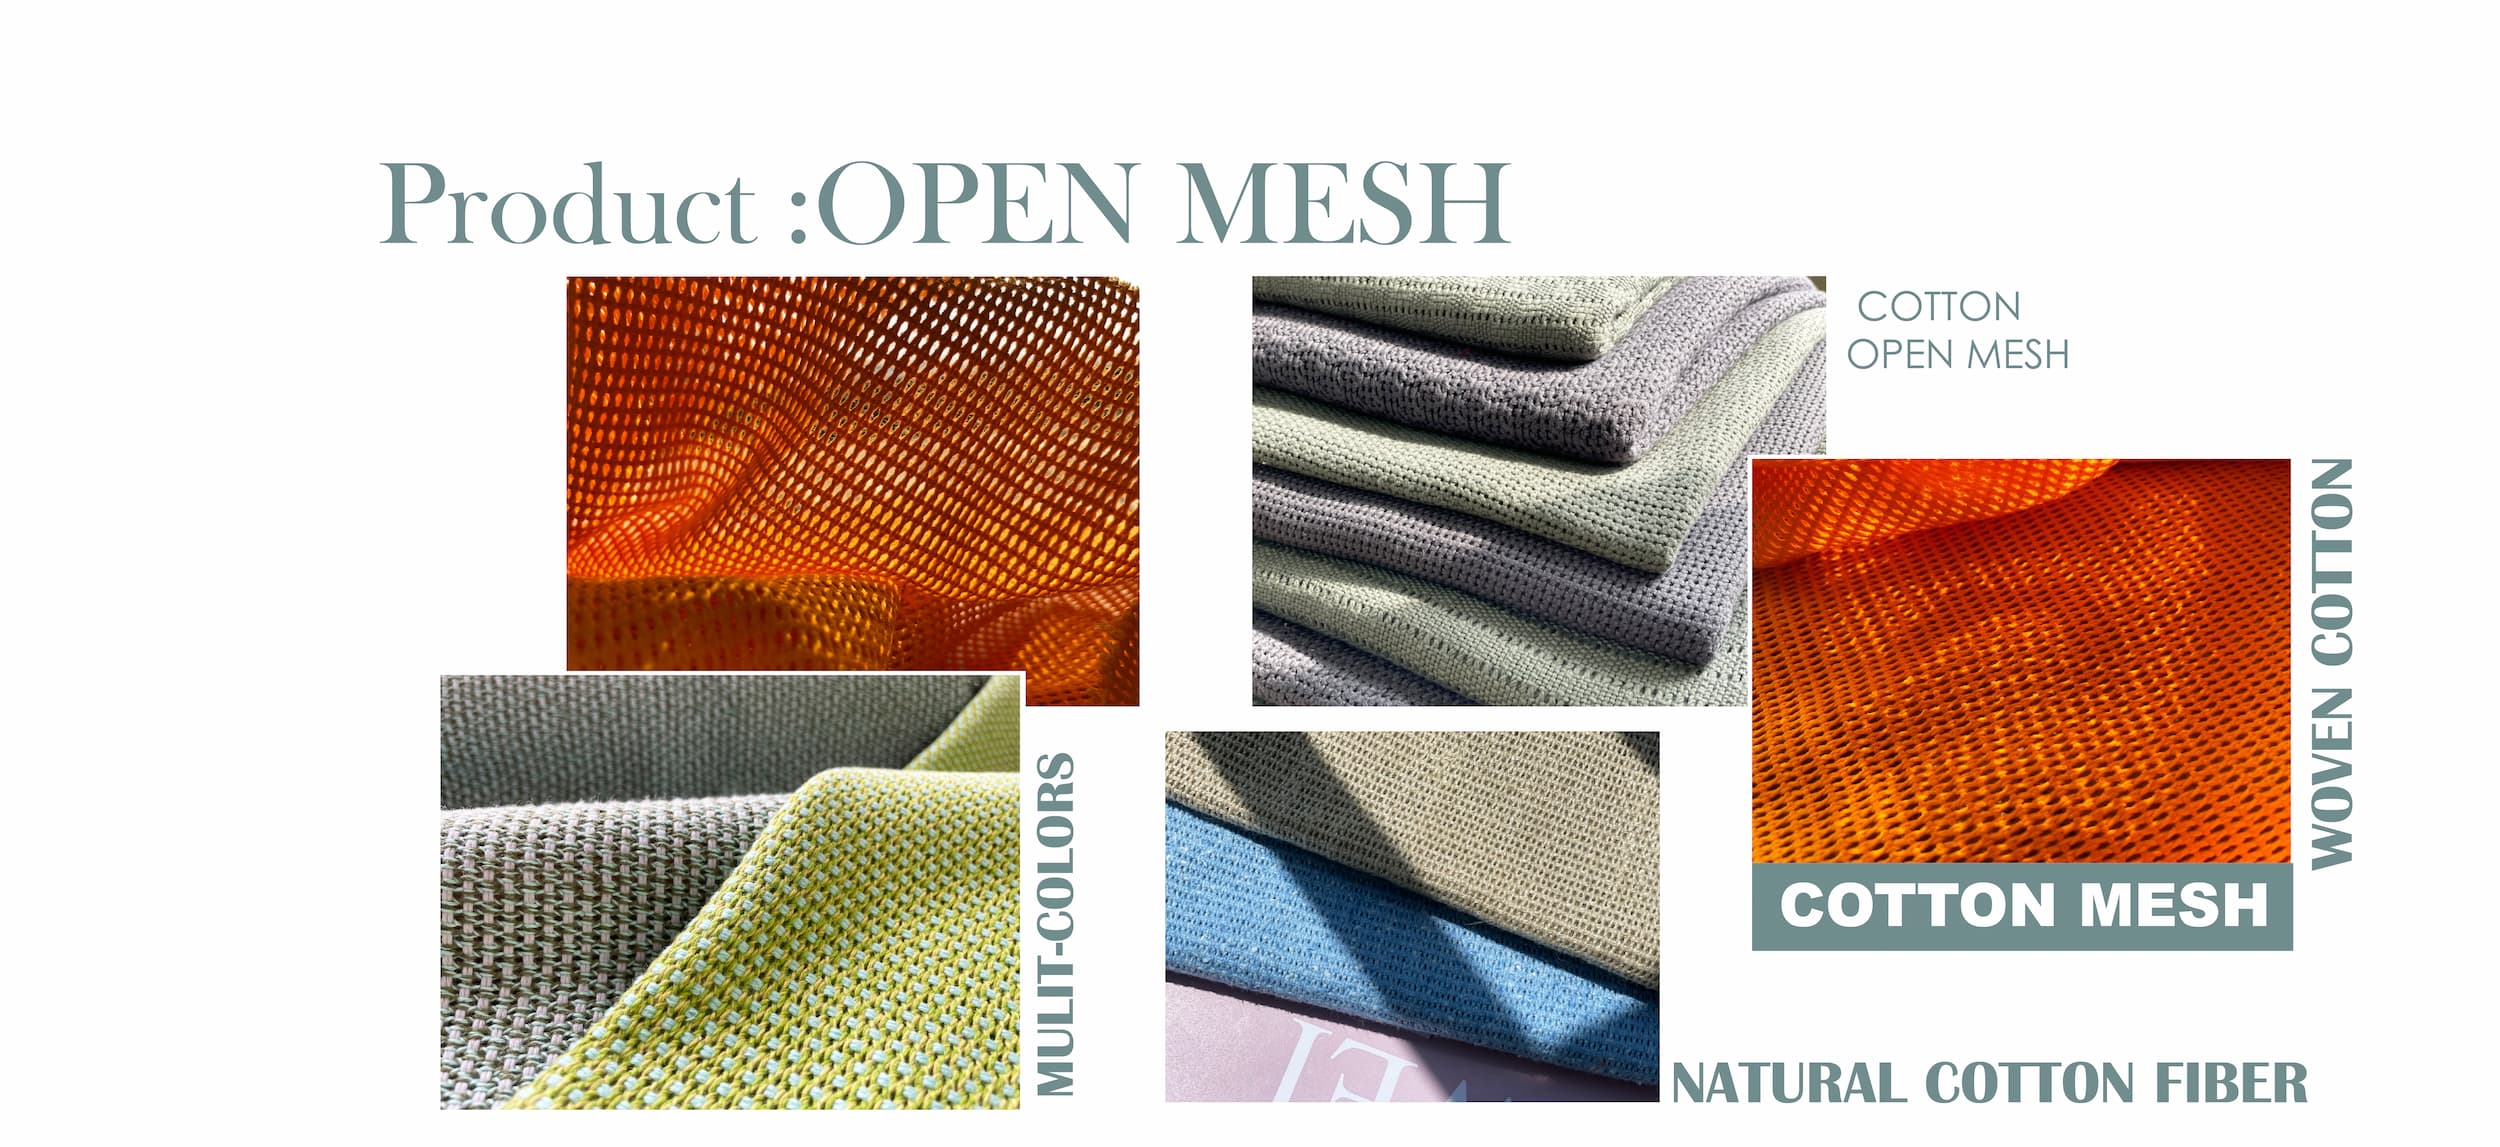 Product:OPEN MESH